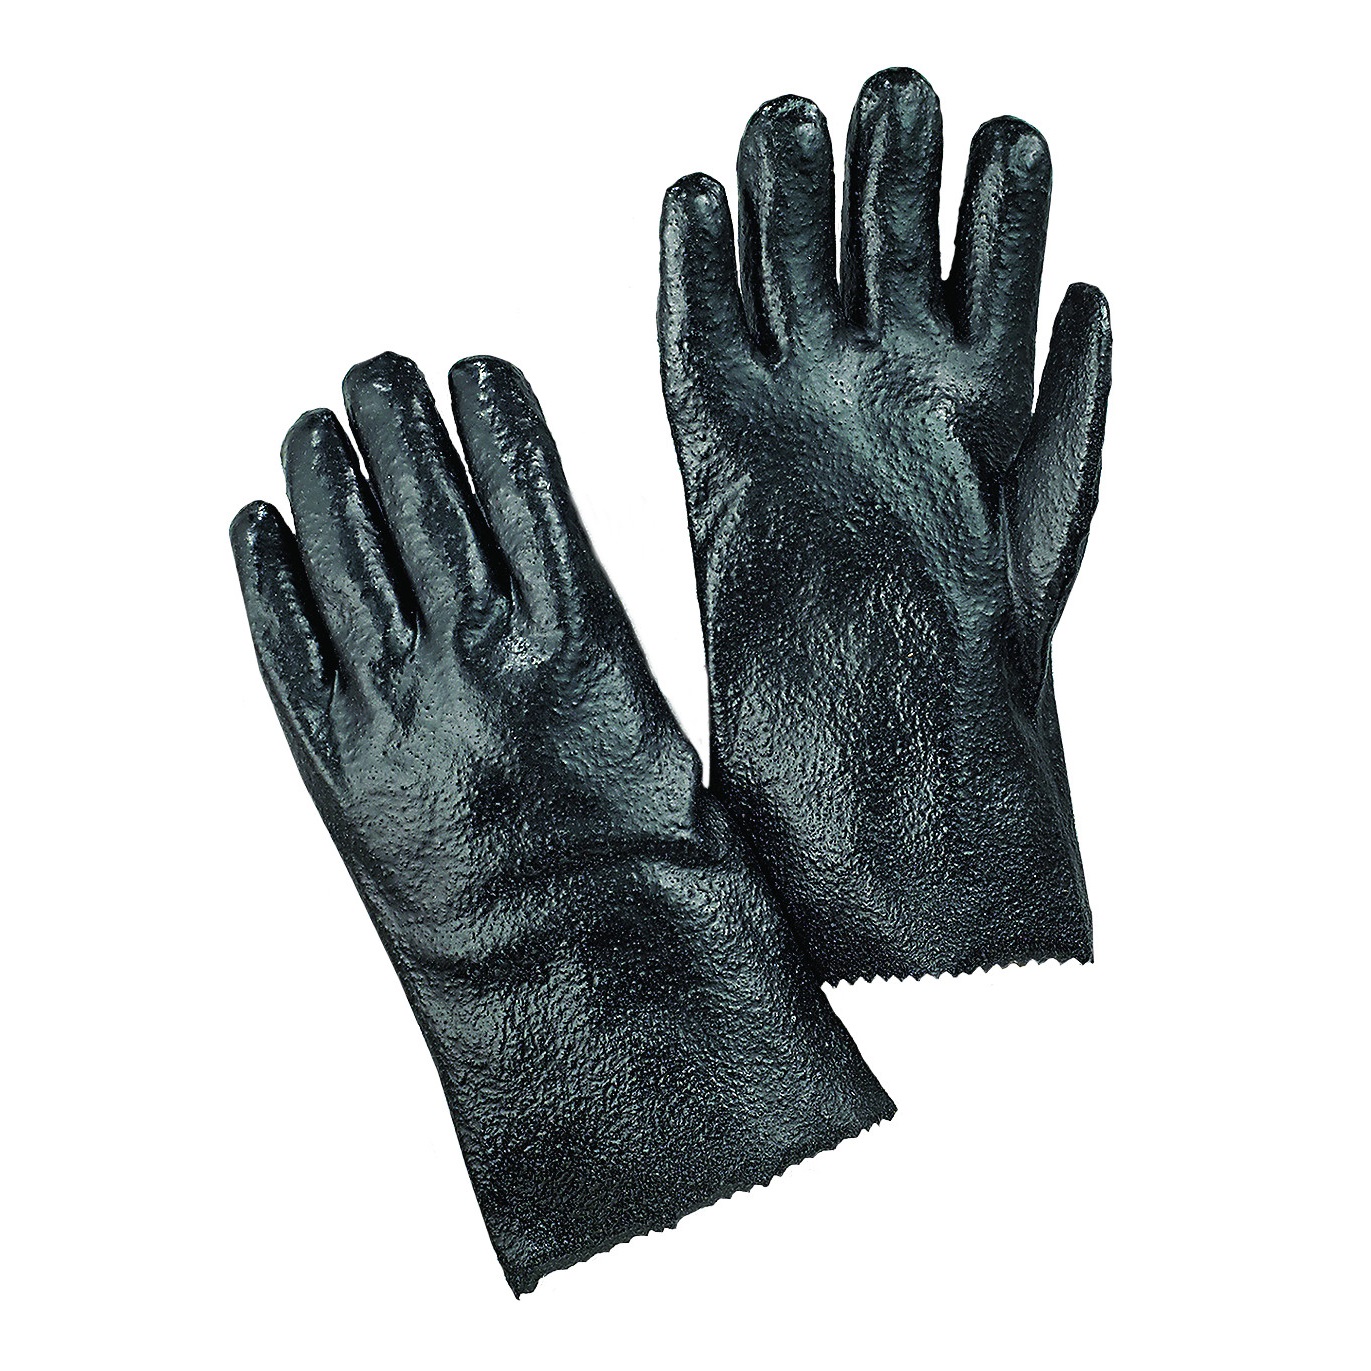 PVC Gloves with Rough Finish, 12 Inch, 1 Pair